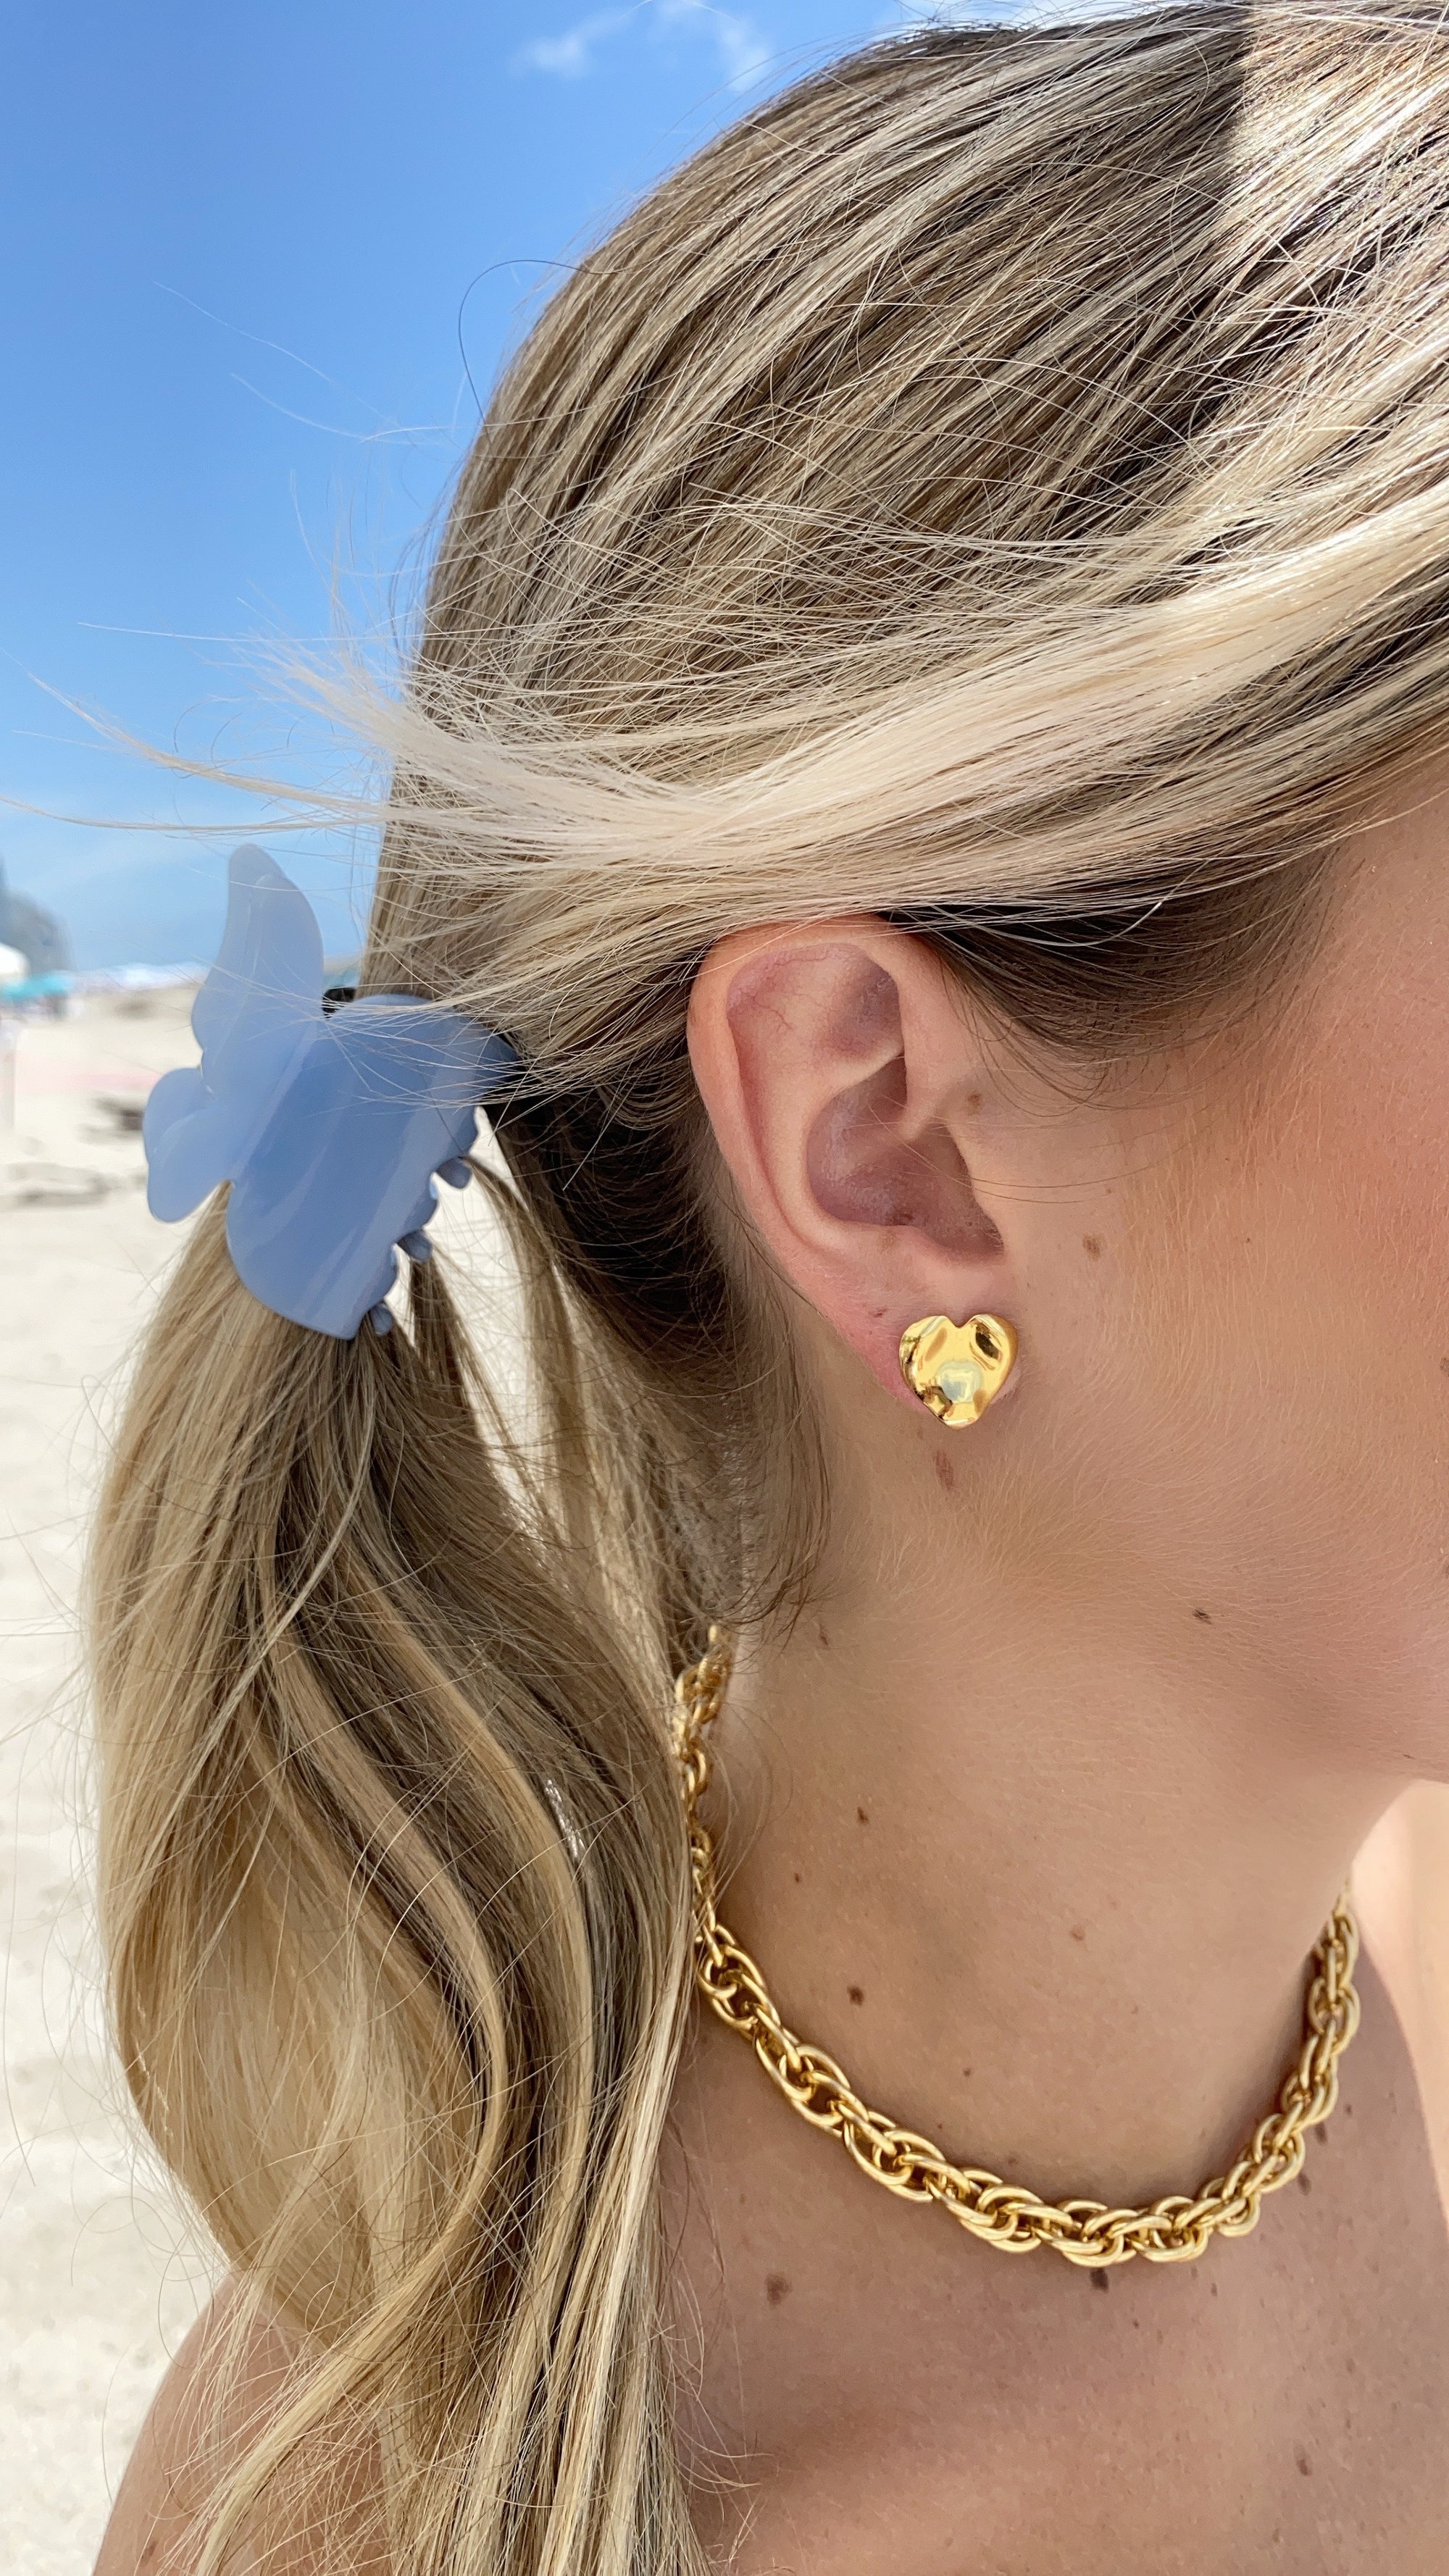 Baby Lillie Studs in Gold